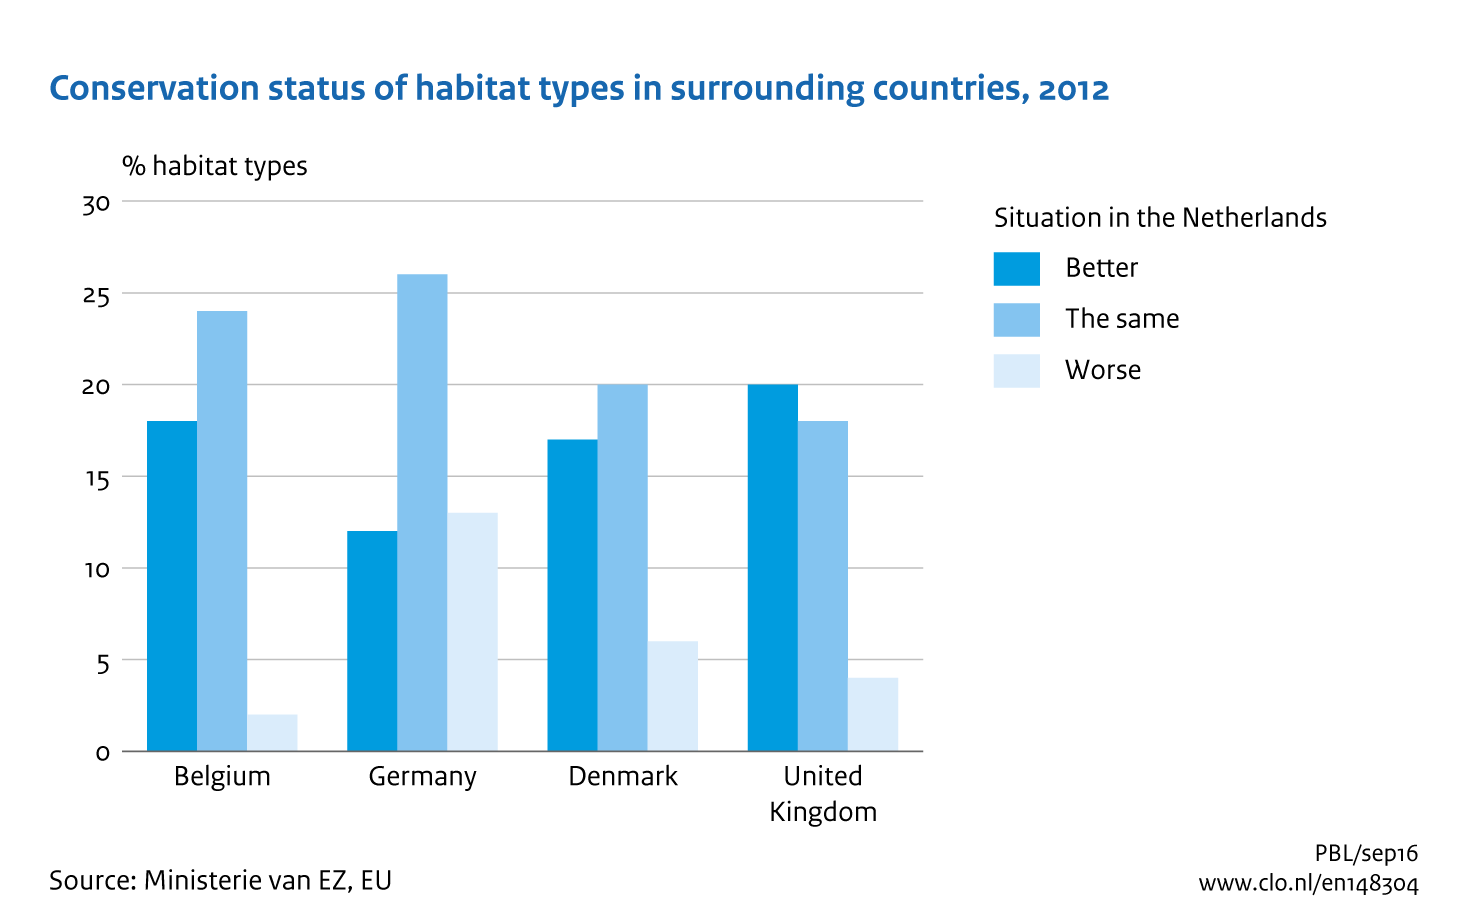 Image Conservation status of habitat types in surrounding countries. The image is further explained in the text.